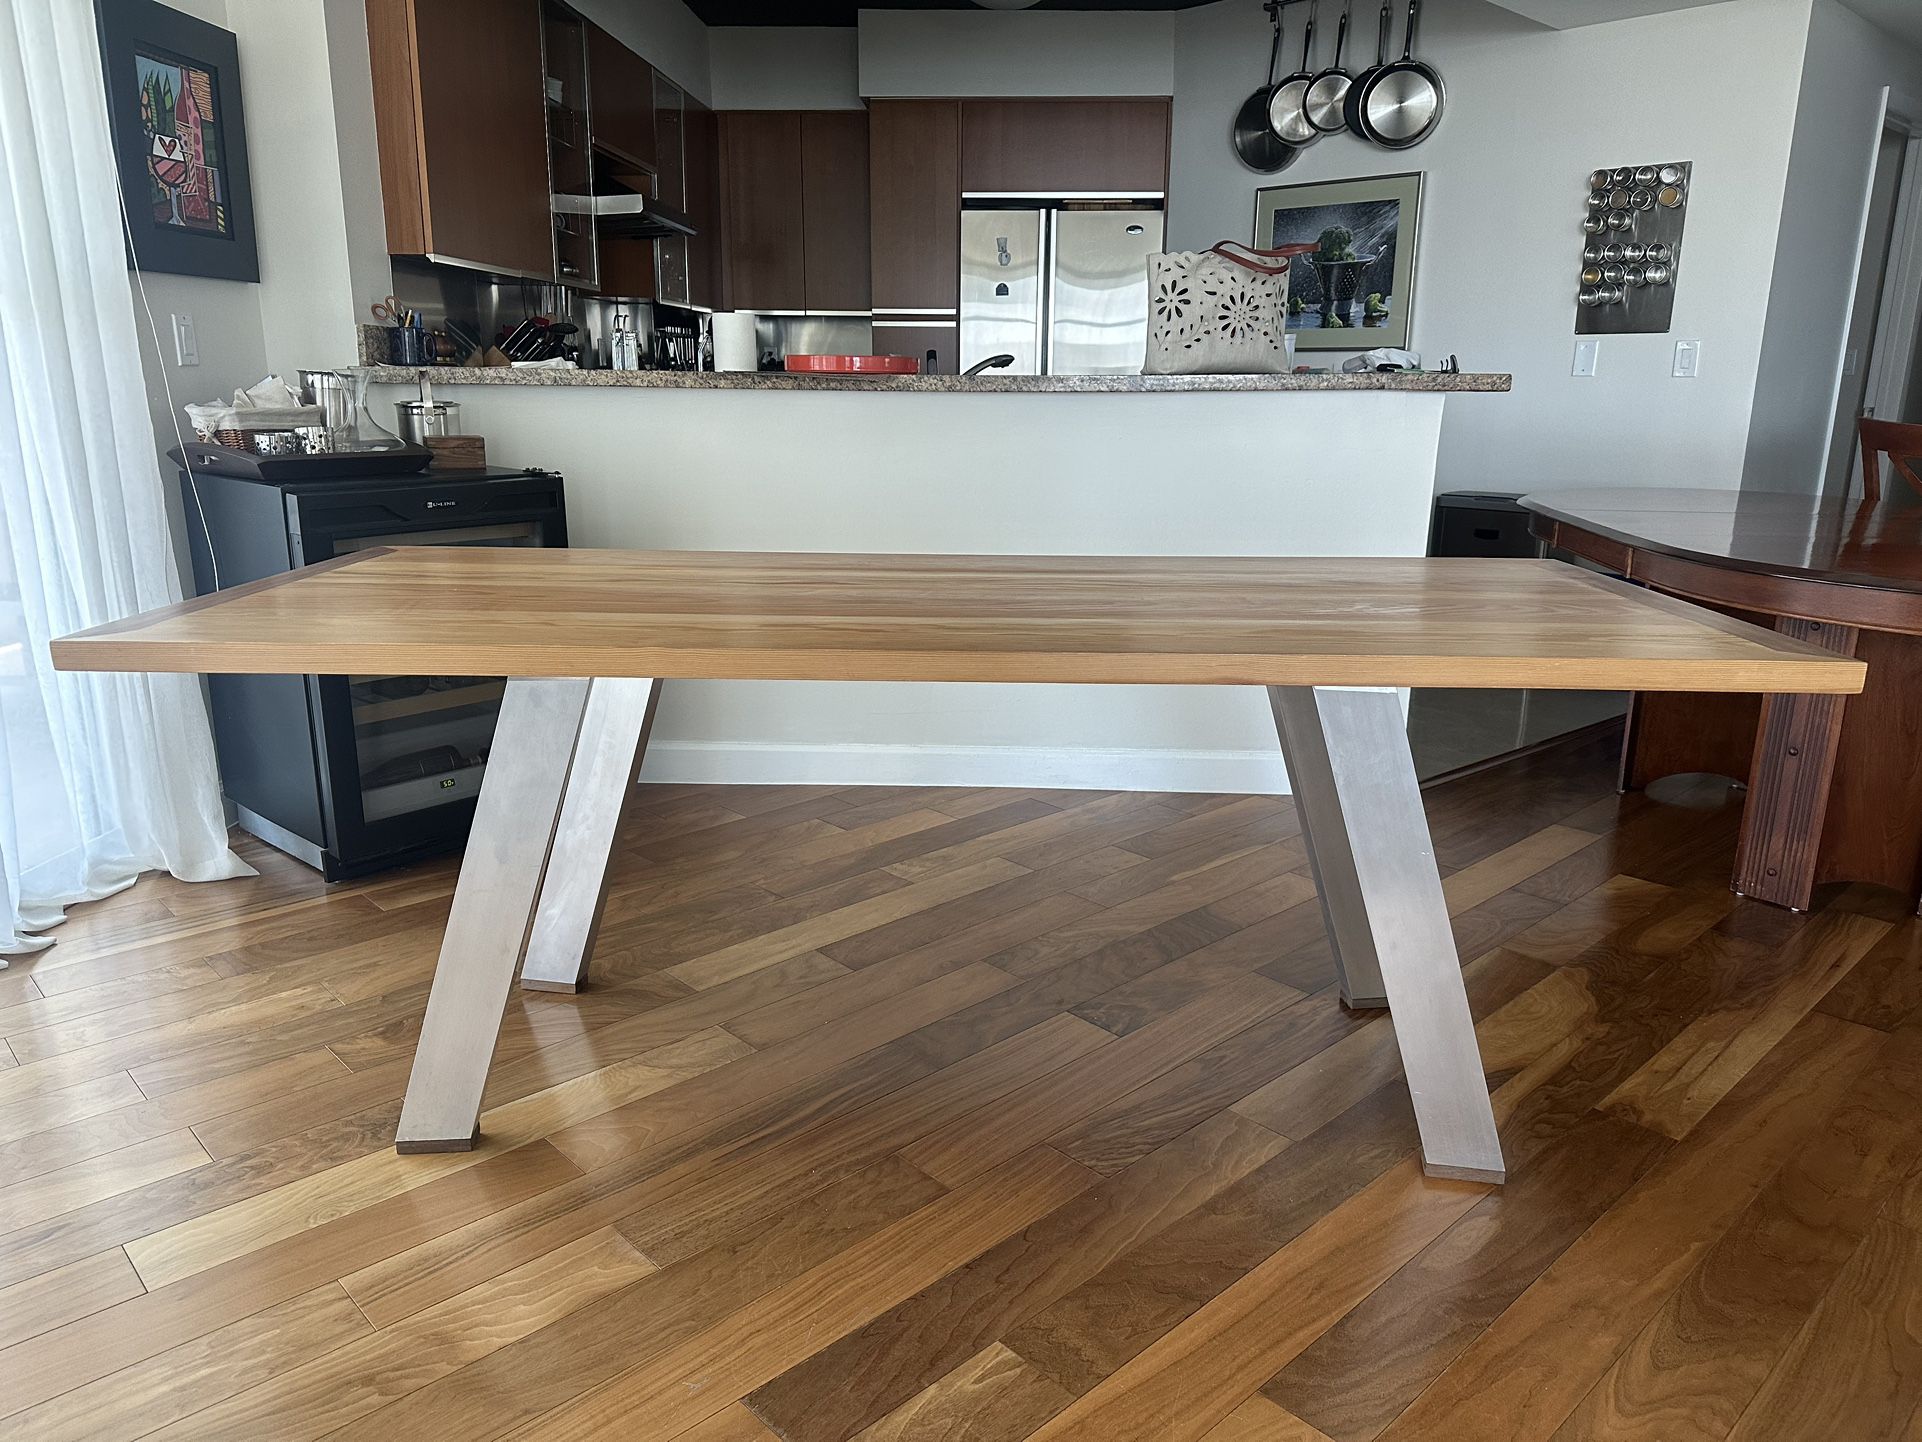 Solid Wood Table With Aluminum Legs - Custom-made